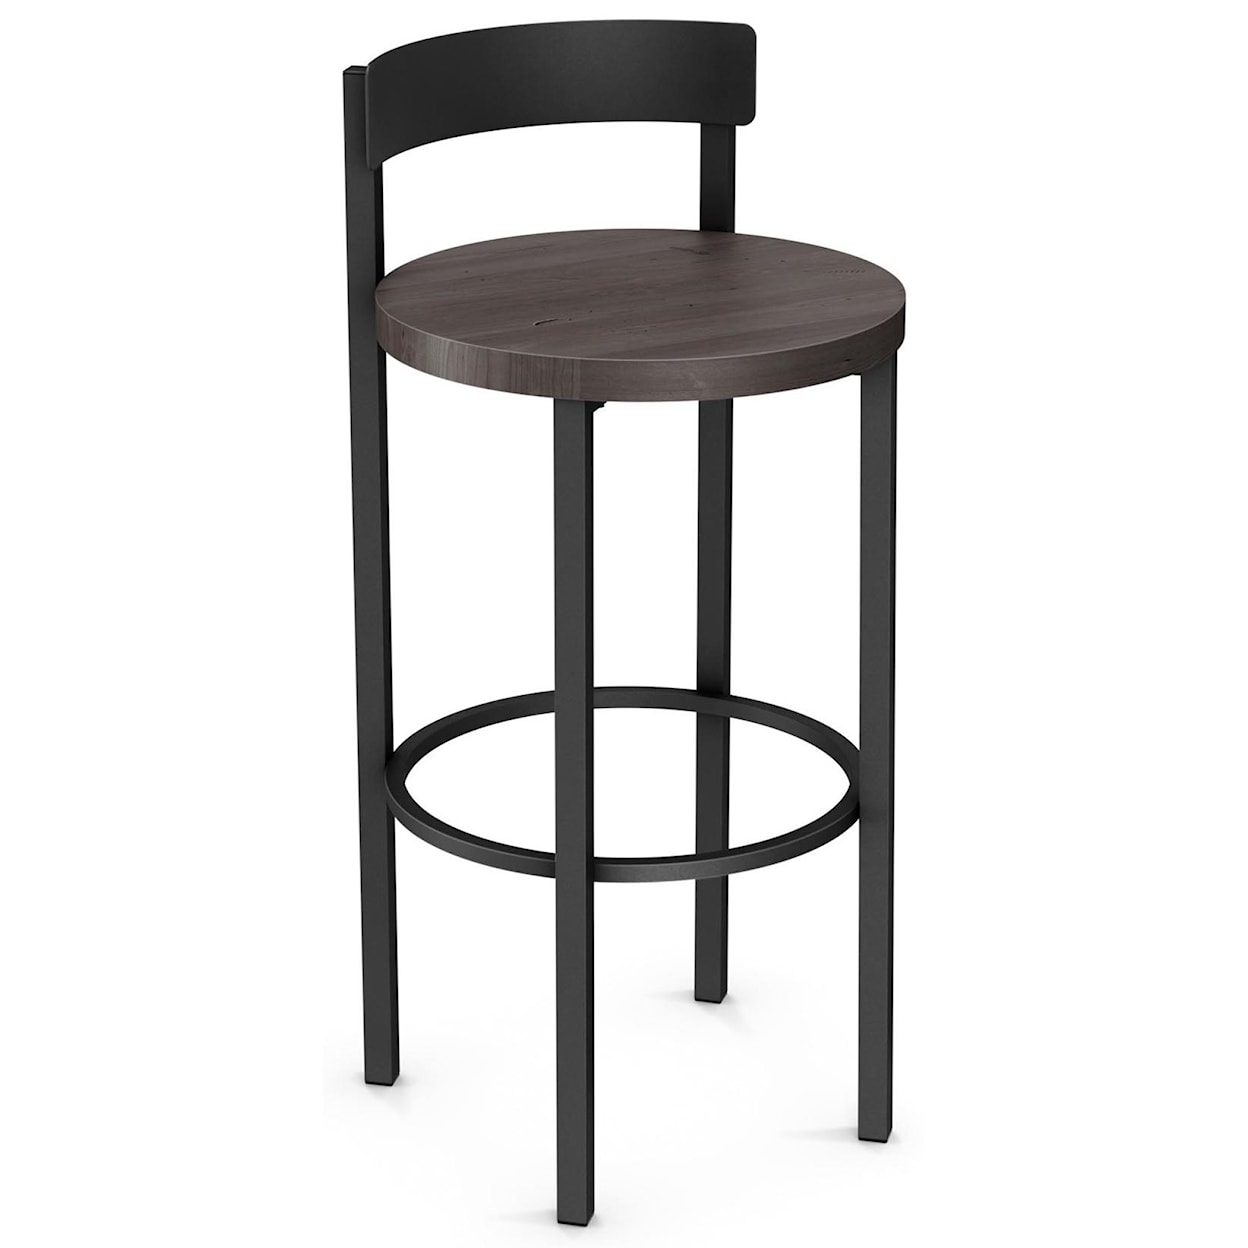 Amisco Industrial 30" Zoe Bar Stool with Wood Seat